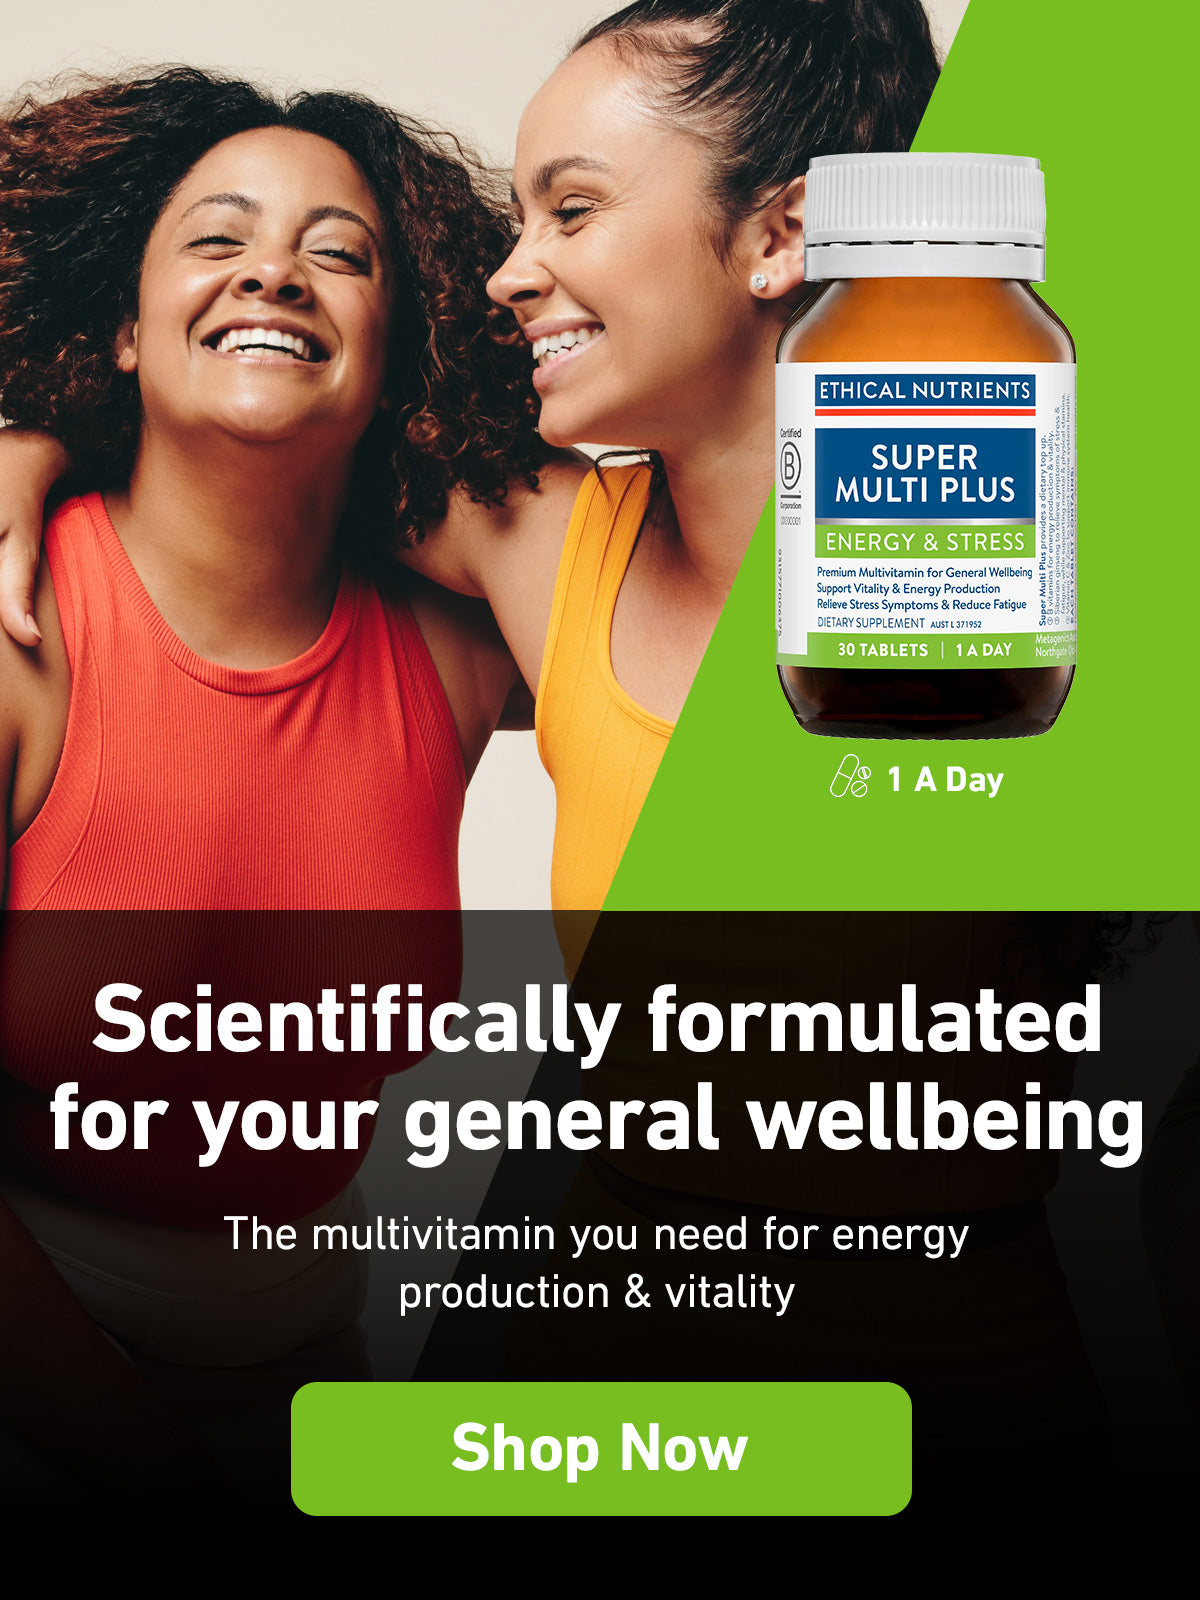 Scientifically formulated for your general wellbeing | Super Multi Plus | Shop Now